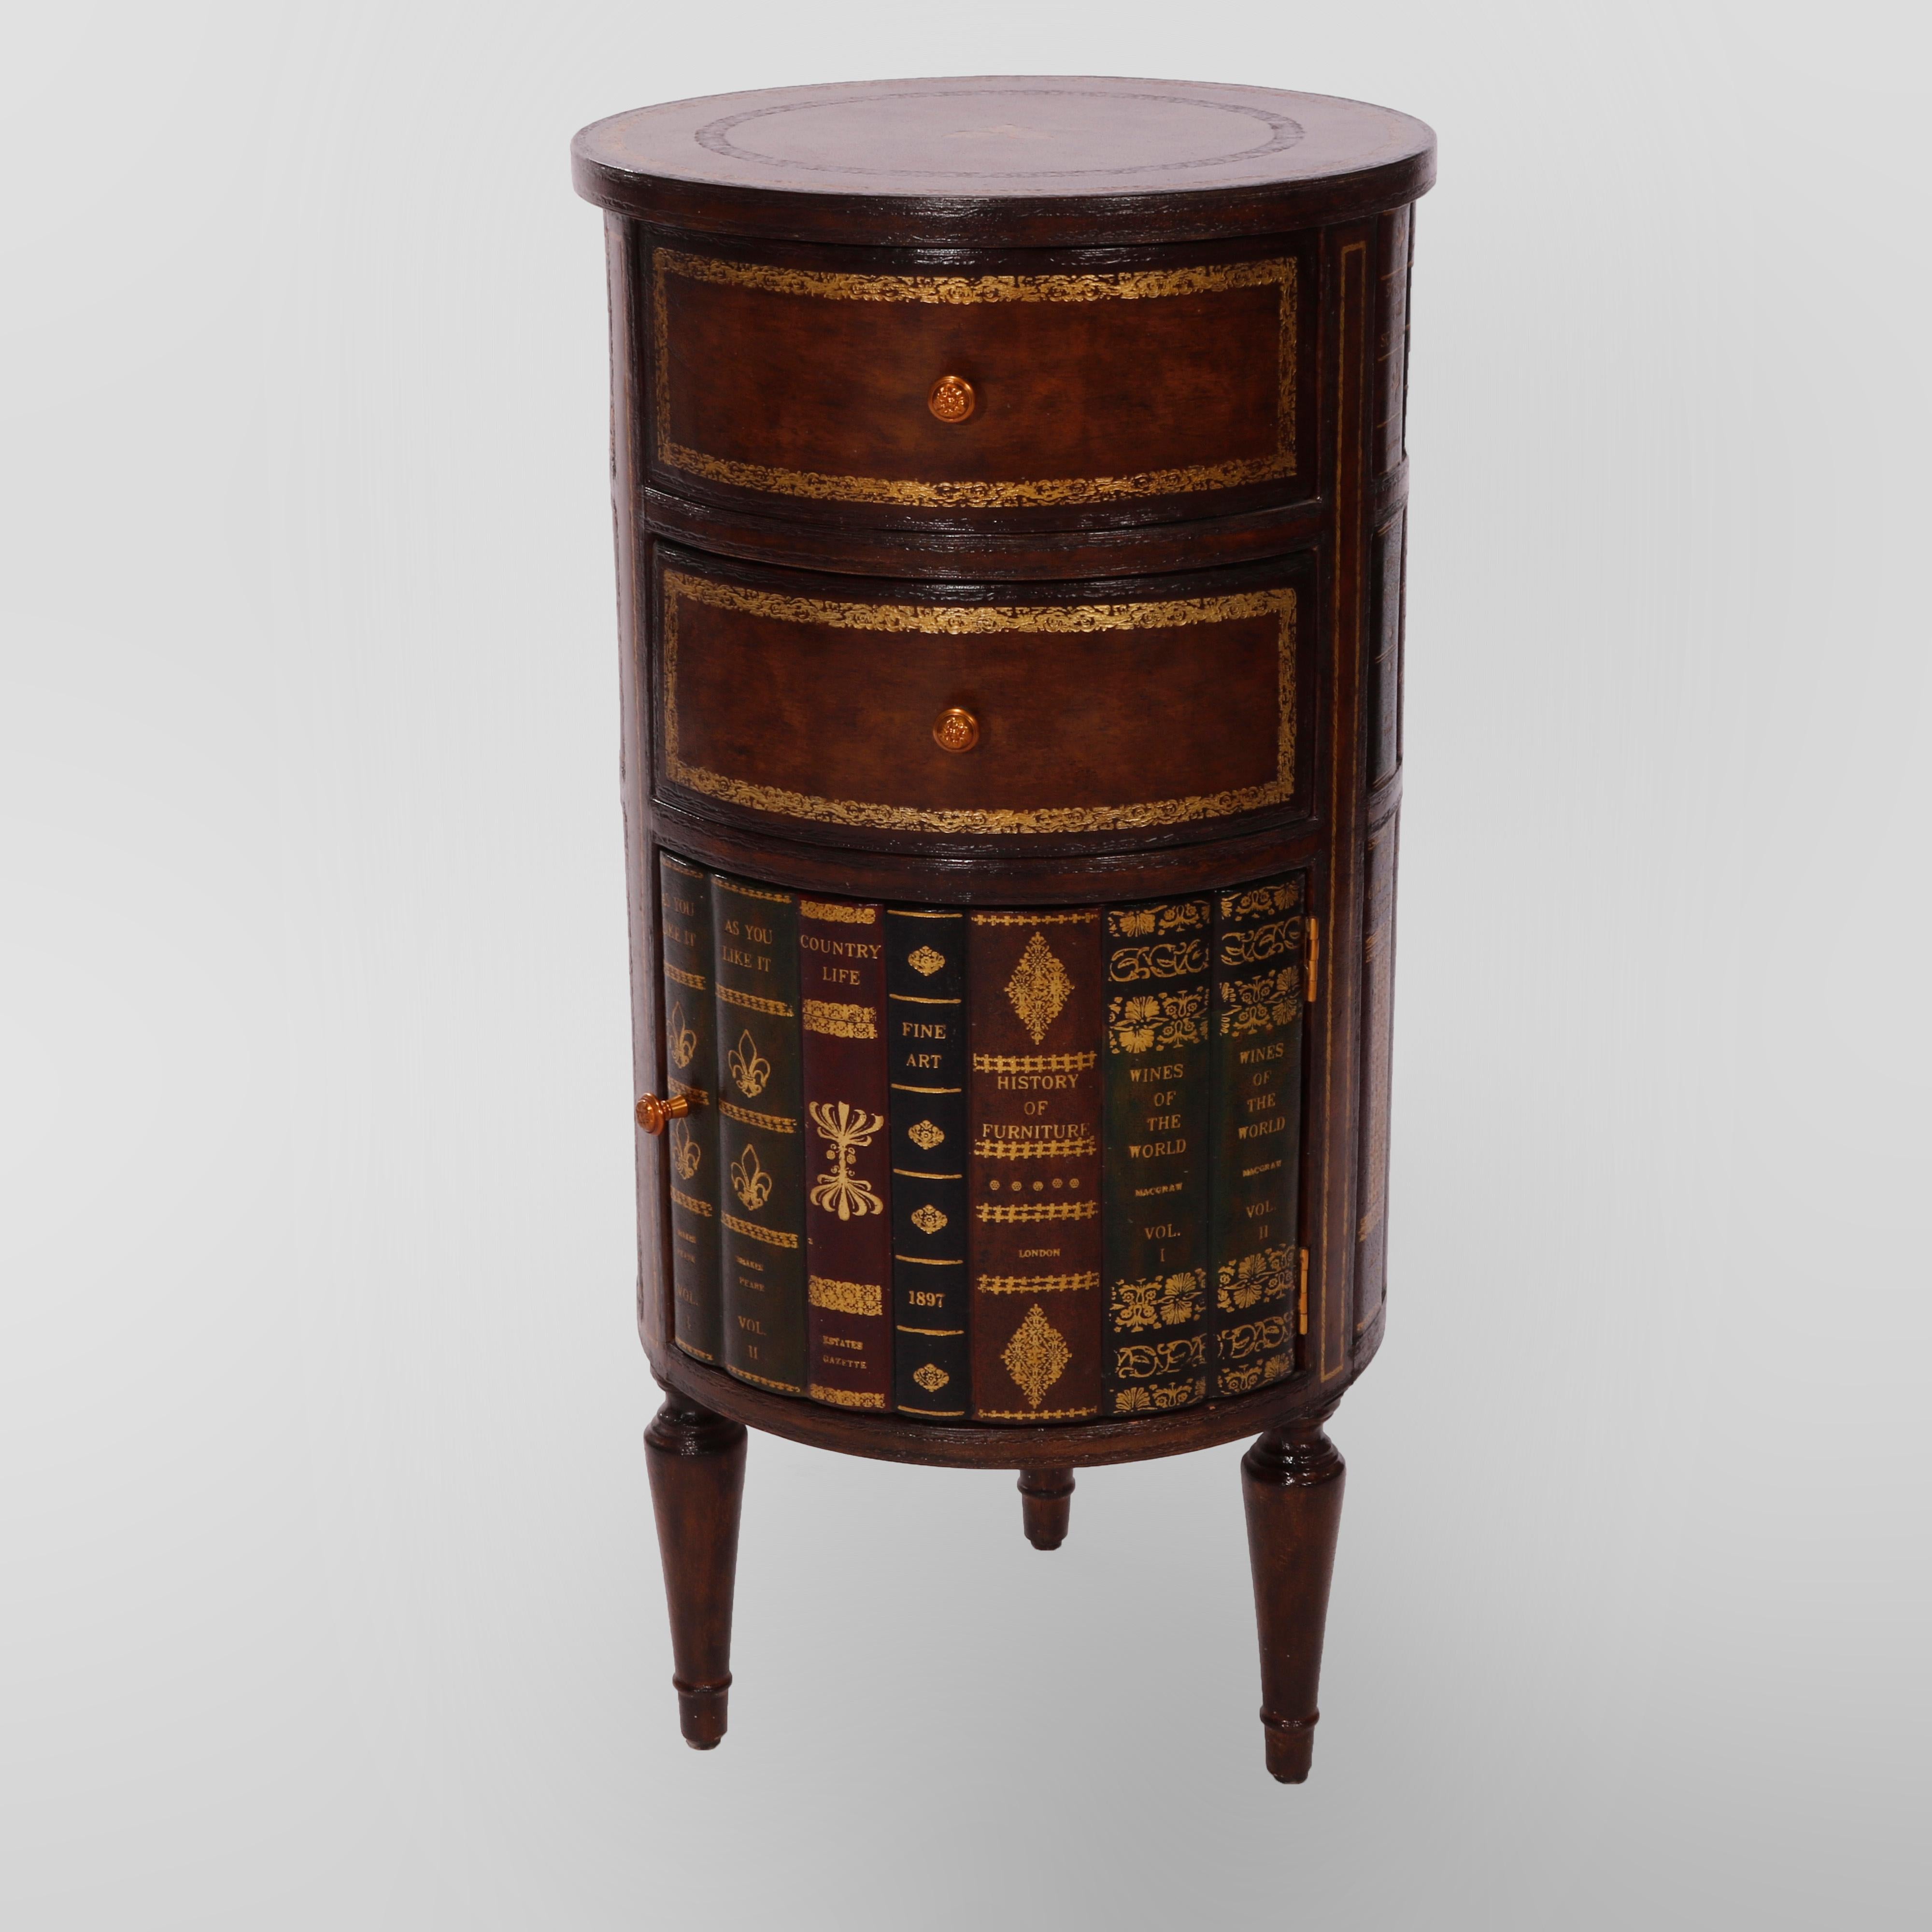 A cabinet side stand by Maitland Smith offers walnut construction in cylidrical form with gilt decorated leather top over library themed case having double drawers over lower cabinet, tooled leather faux book facing throughout, raised on tapered